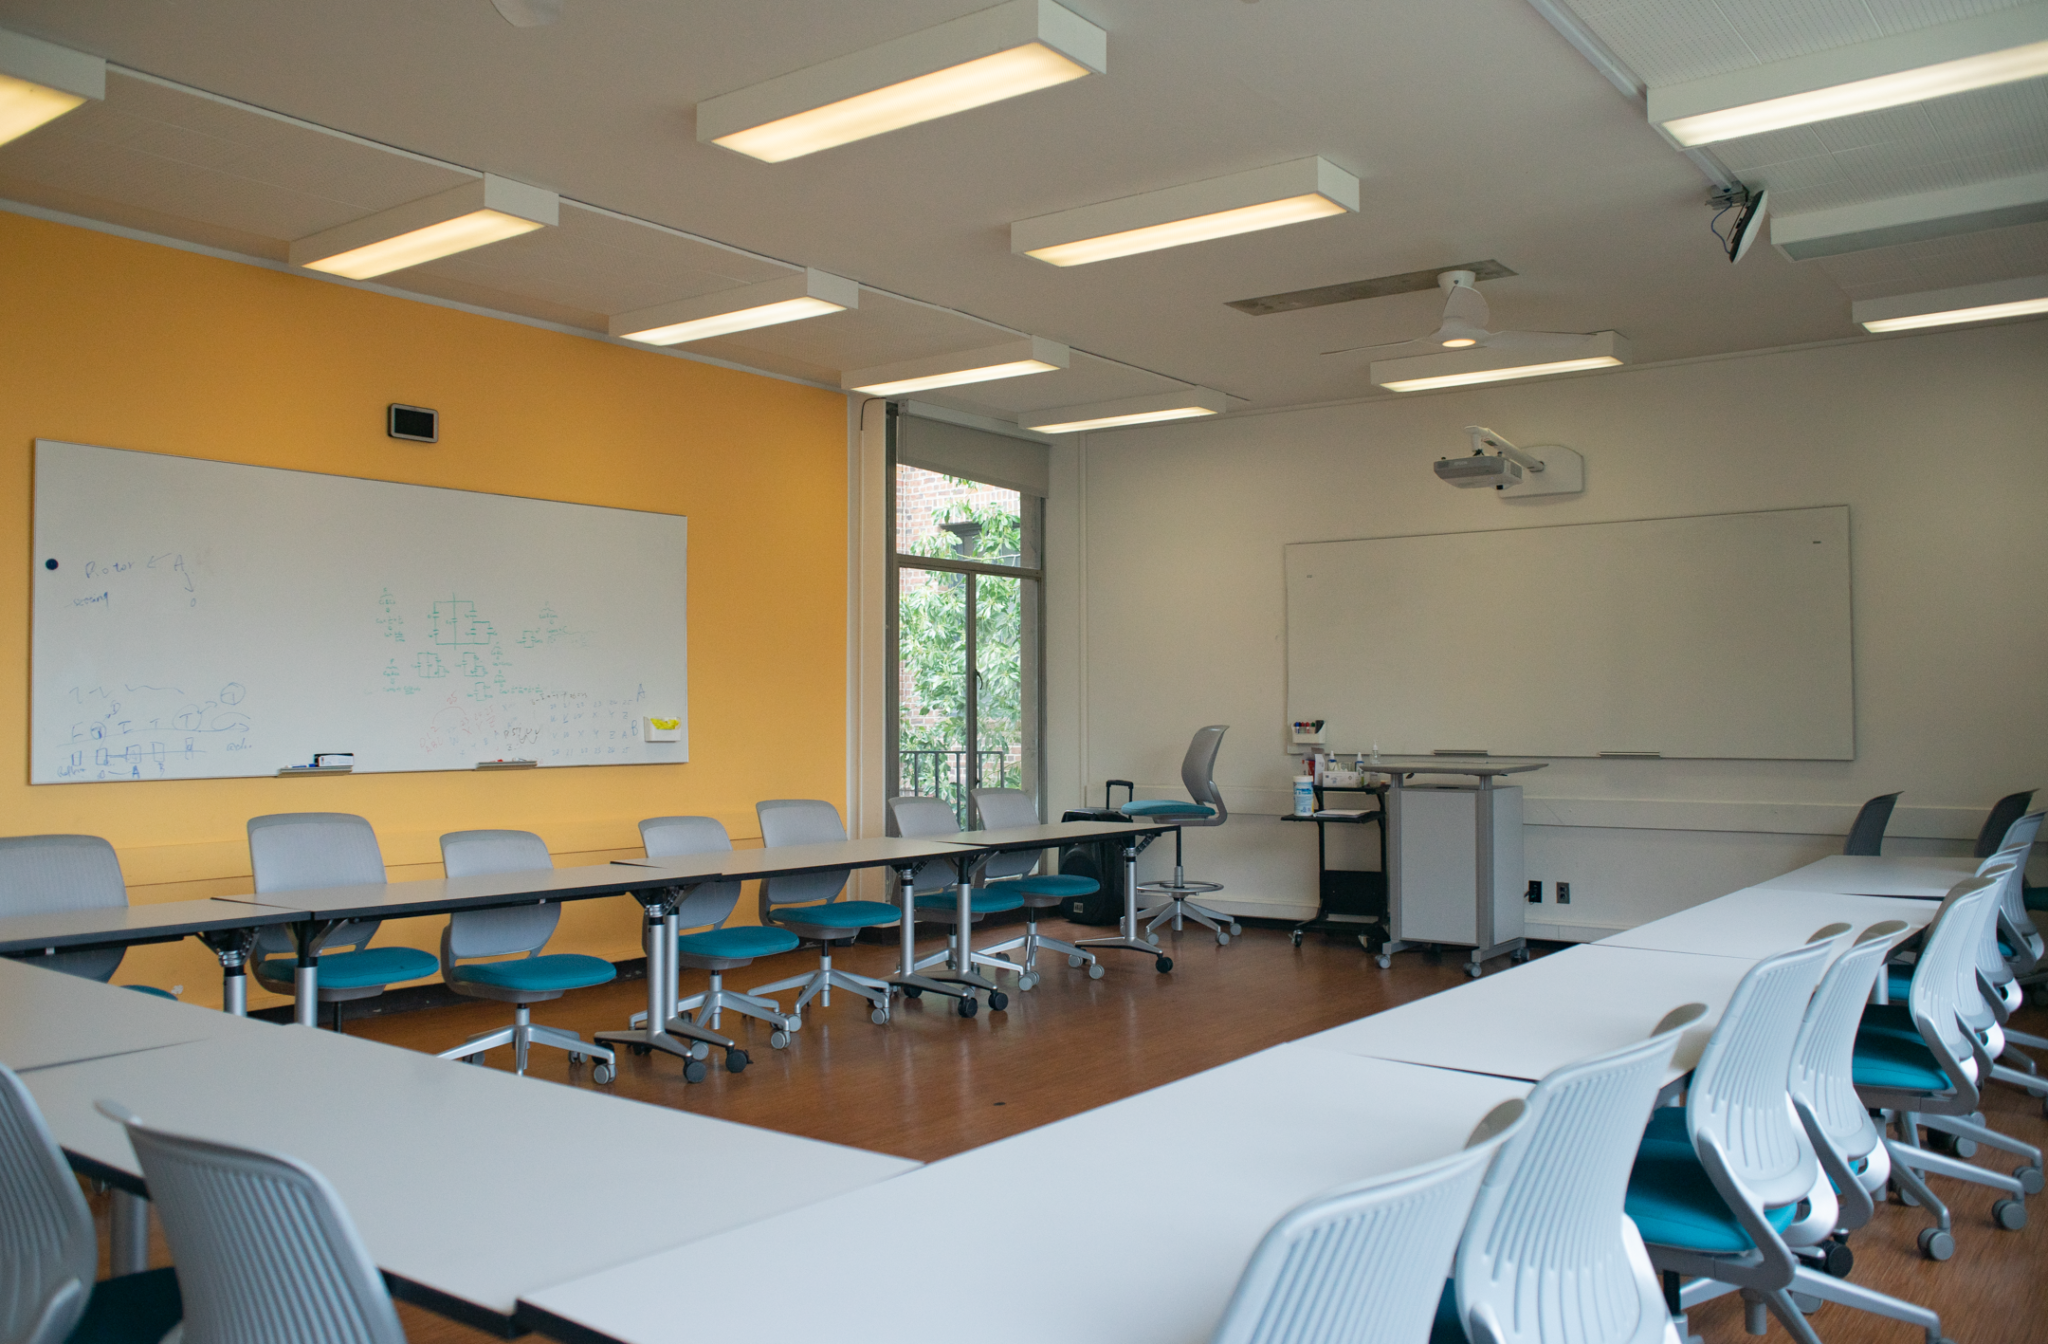 One of the Shires Hall classrooms featuring a semicircle of tables around a podium.